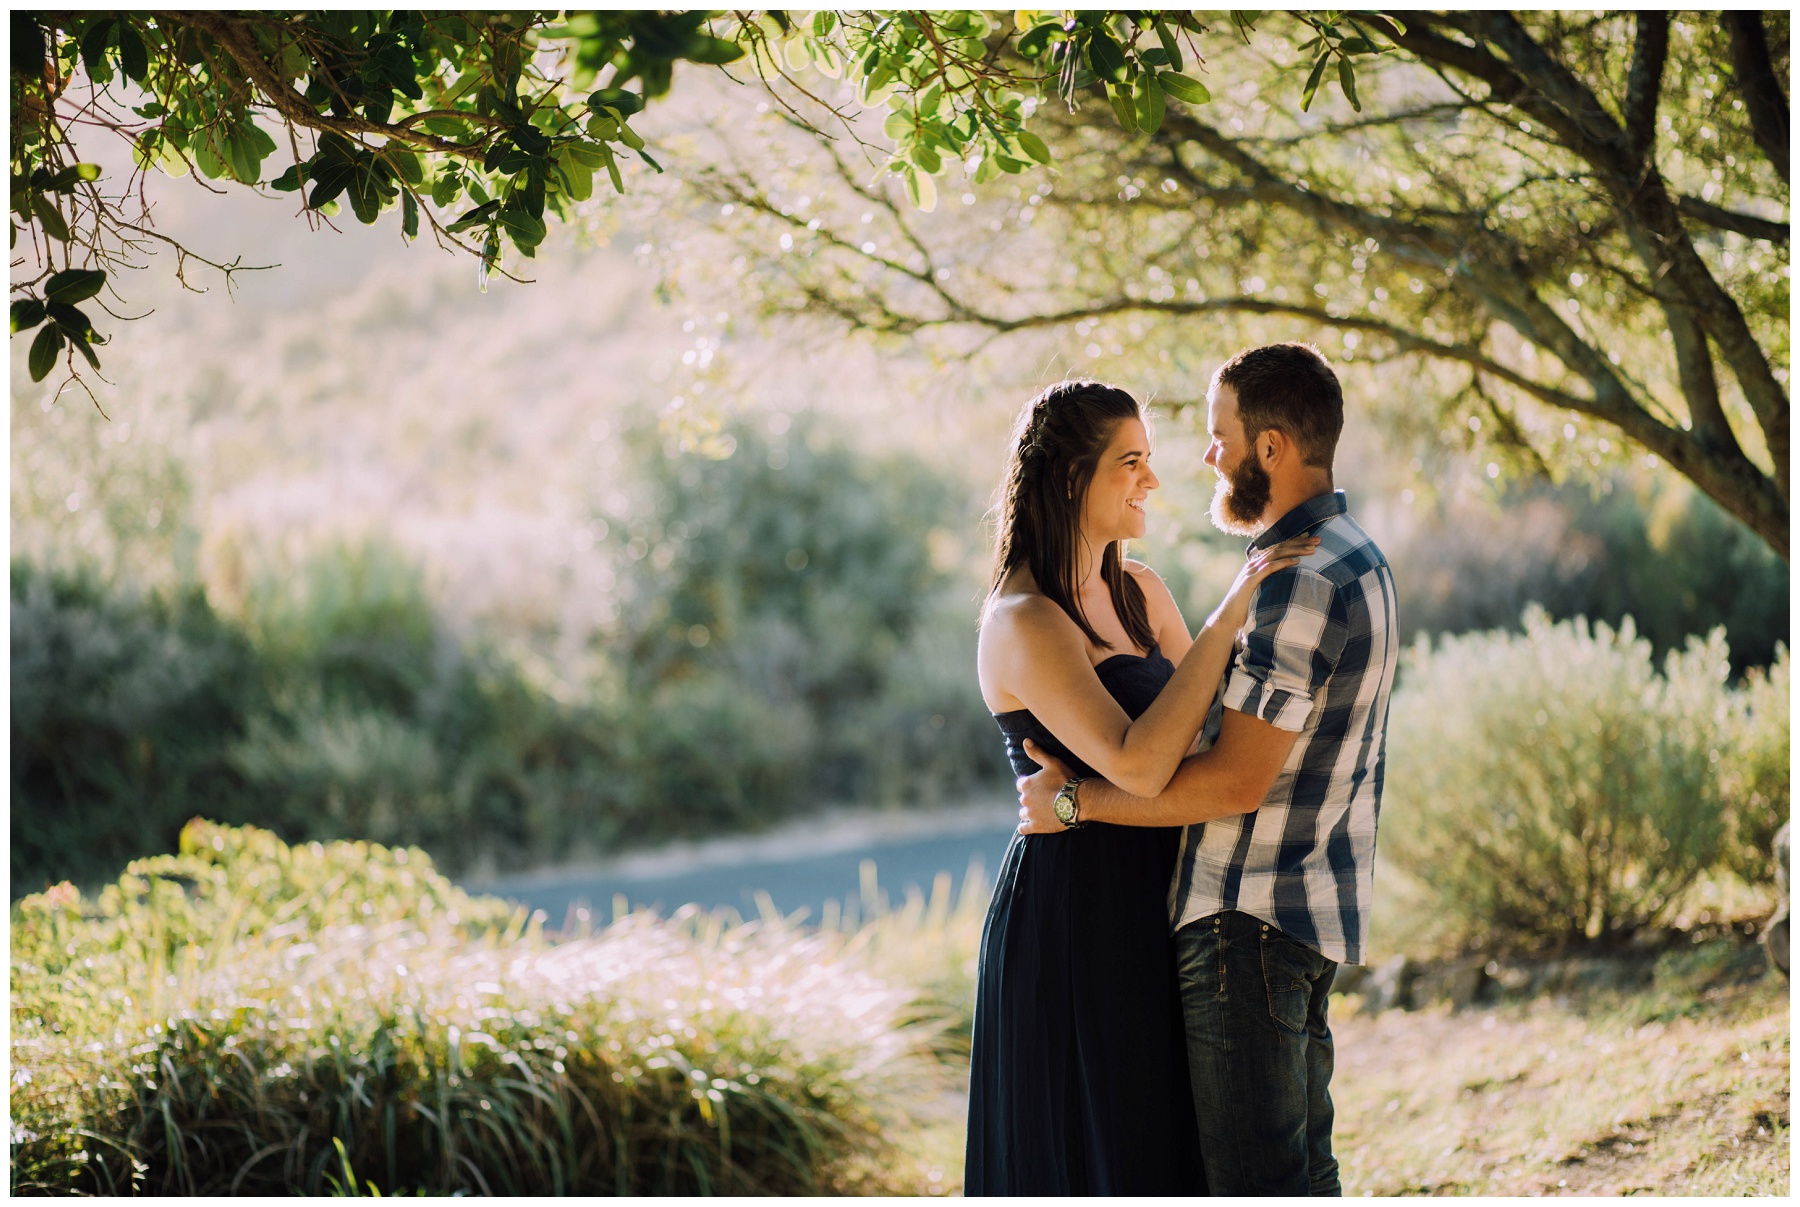 Ronel Kruger Cape Town Wedding and Lifestyle Photographer_0308.jpg